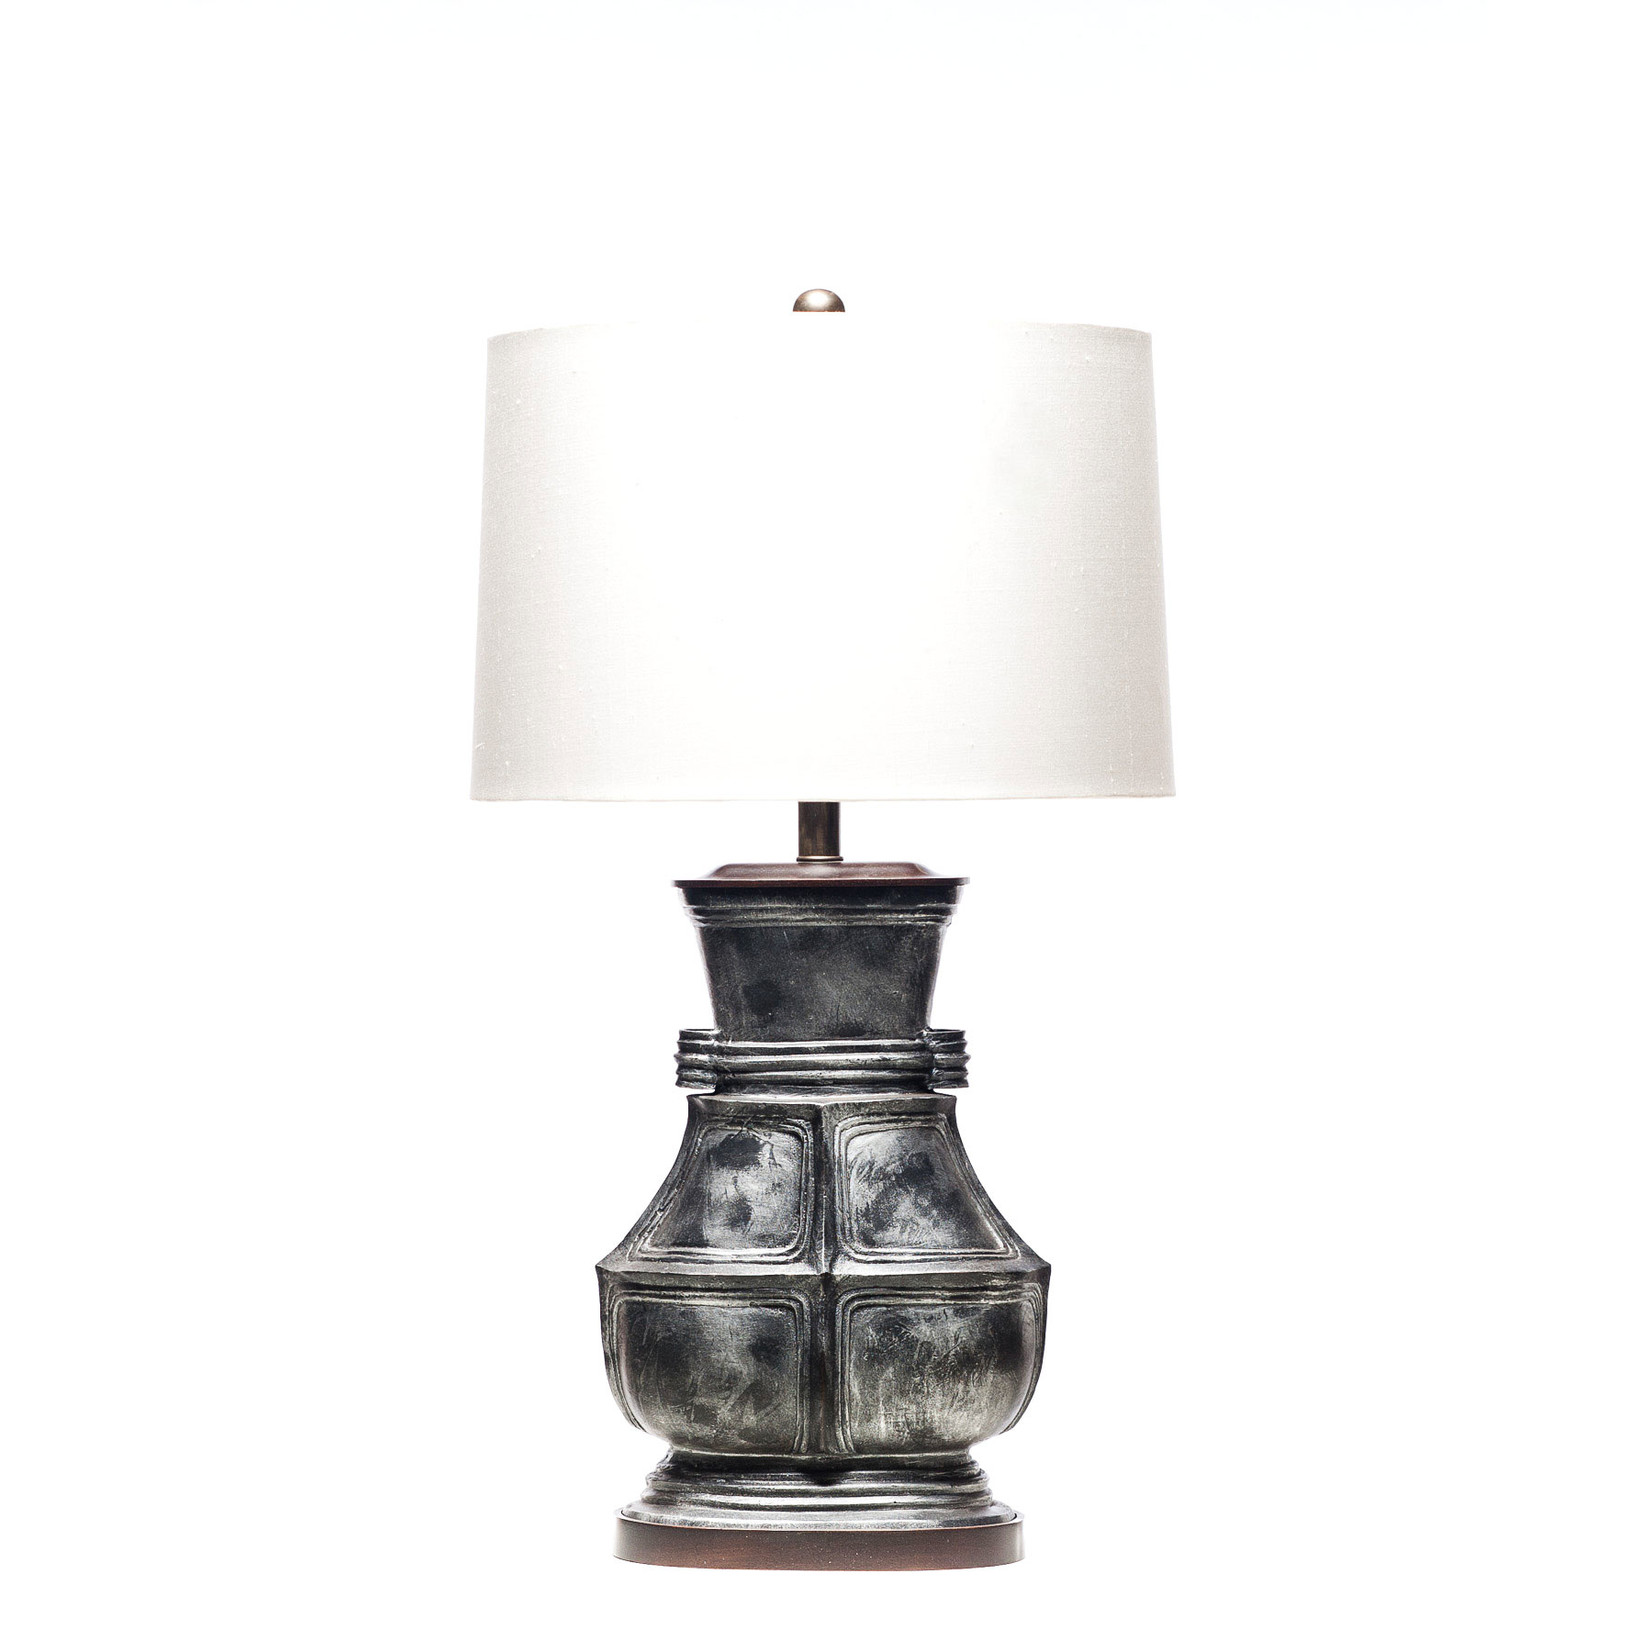 Lawrence & Scott Amell Table Lamp in Verdigris Bronze (Weathered Patina)